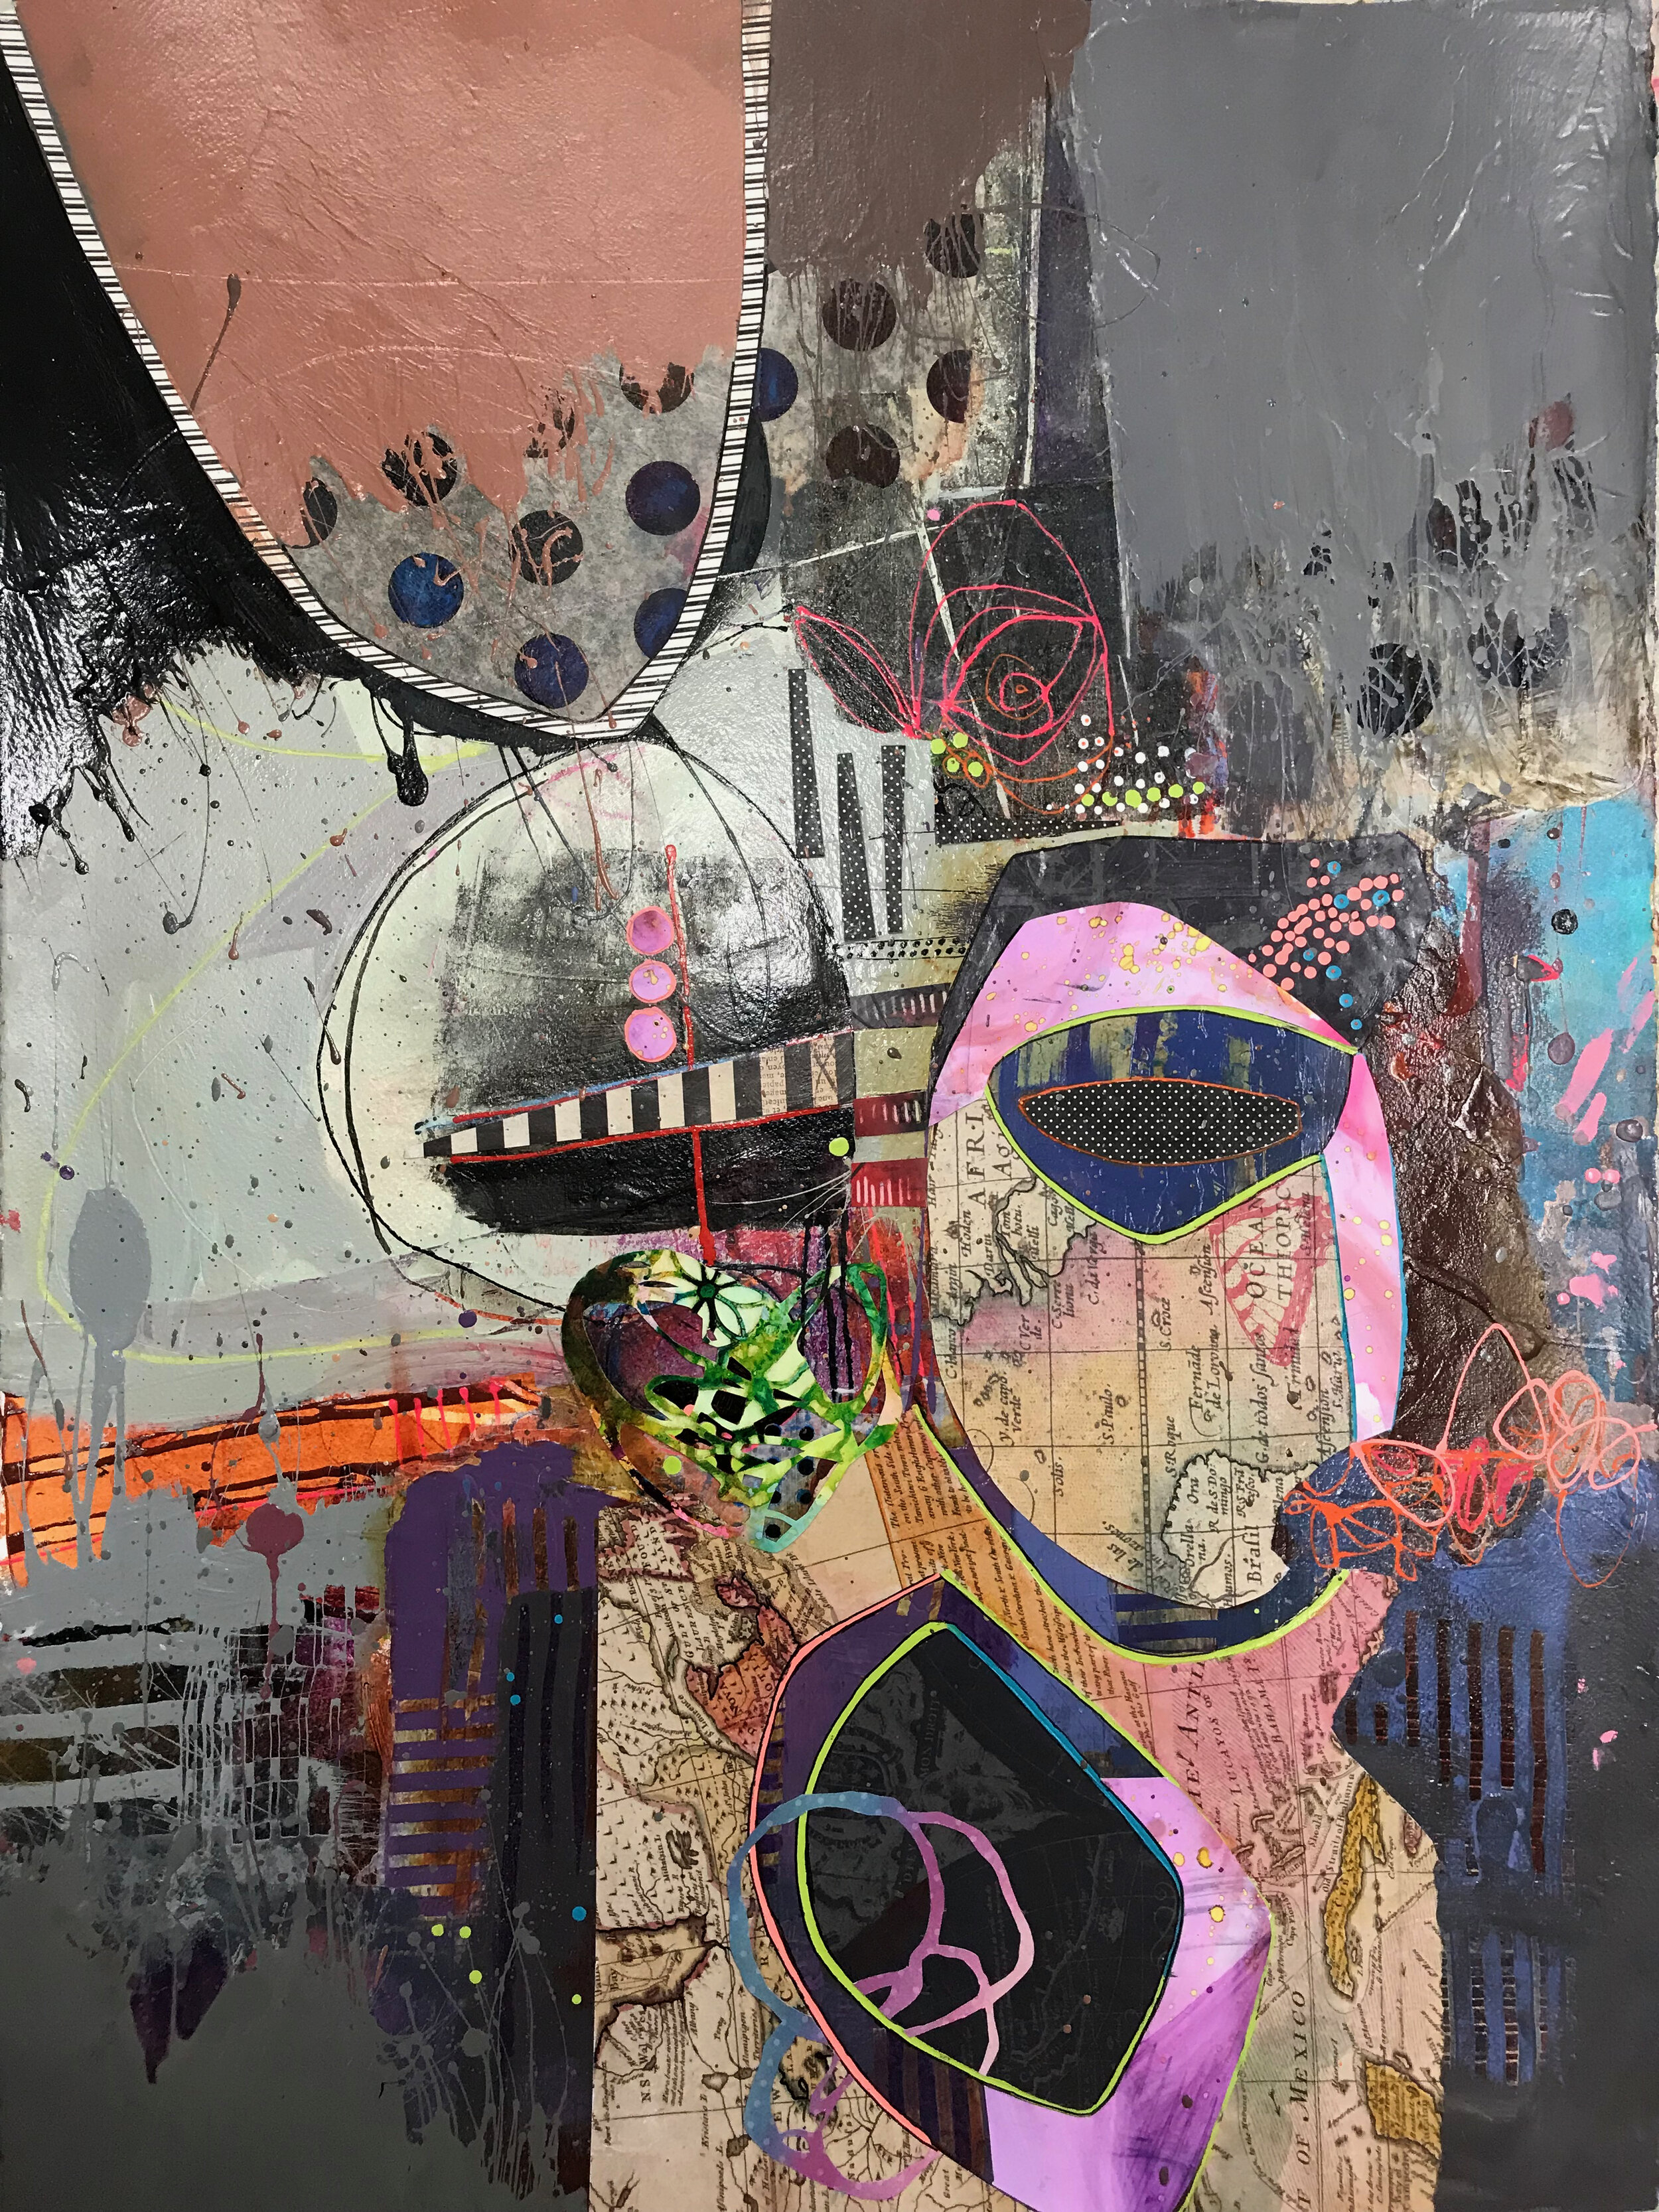   Impromptu , mixed-media work by Mary Marley 